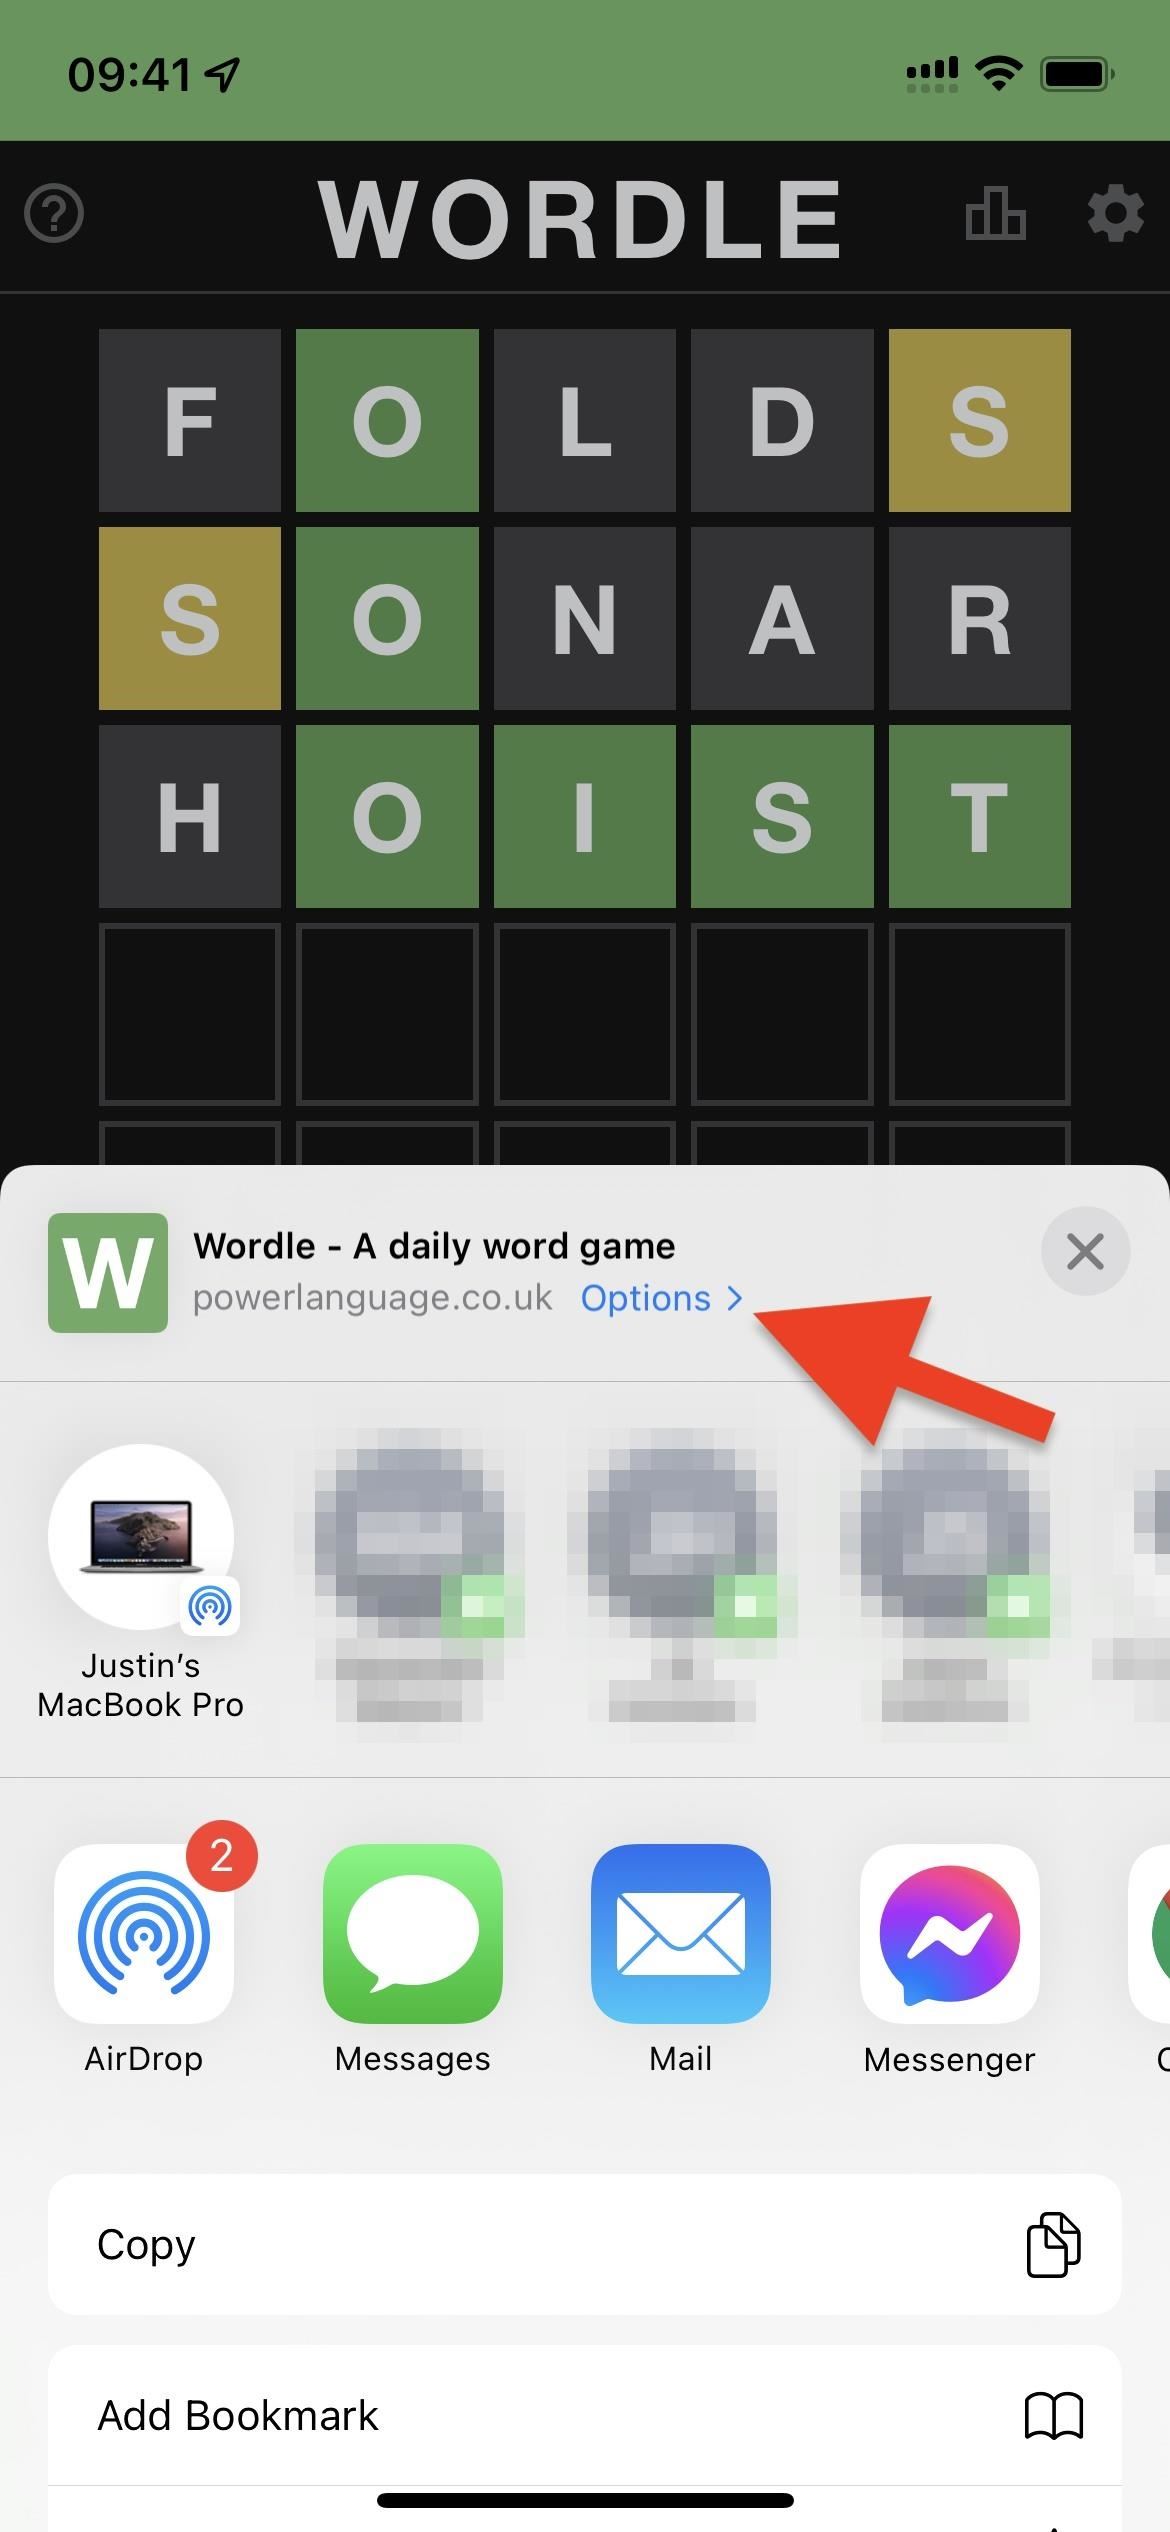 How to Download the Real Wordle Game on Your Phone for Years of Free Offline Gameplay